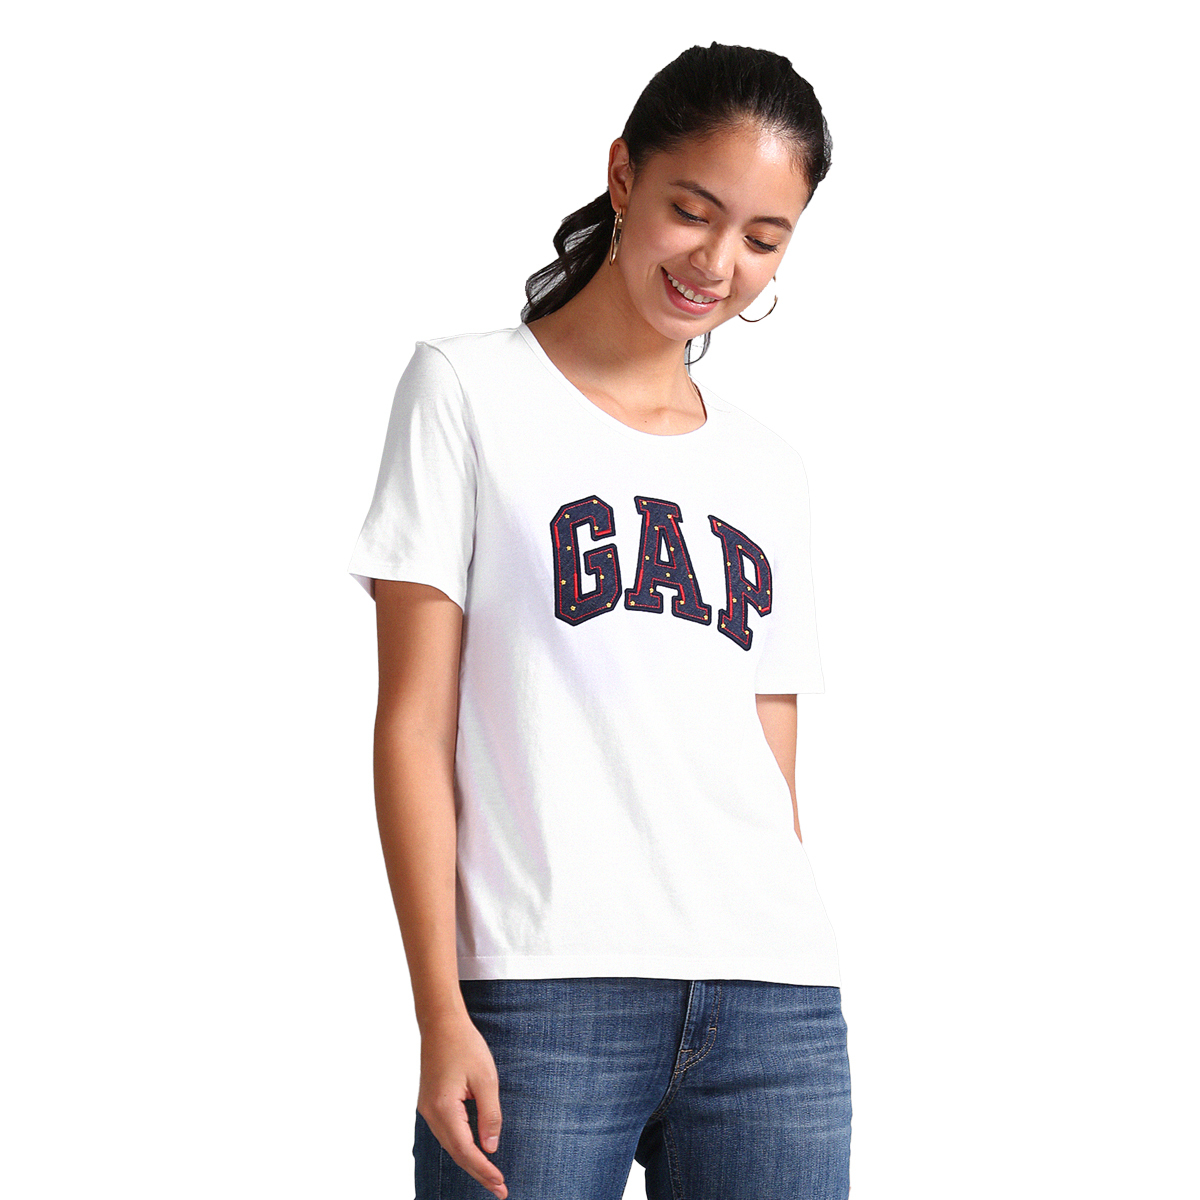 Gap Solid Color Round Neck Short Sleeve T-Shirt Styled with Logo Applique - White